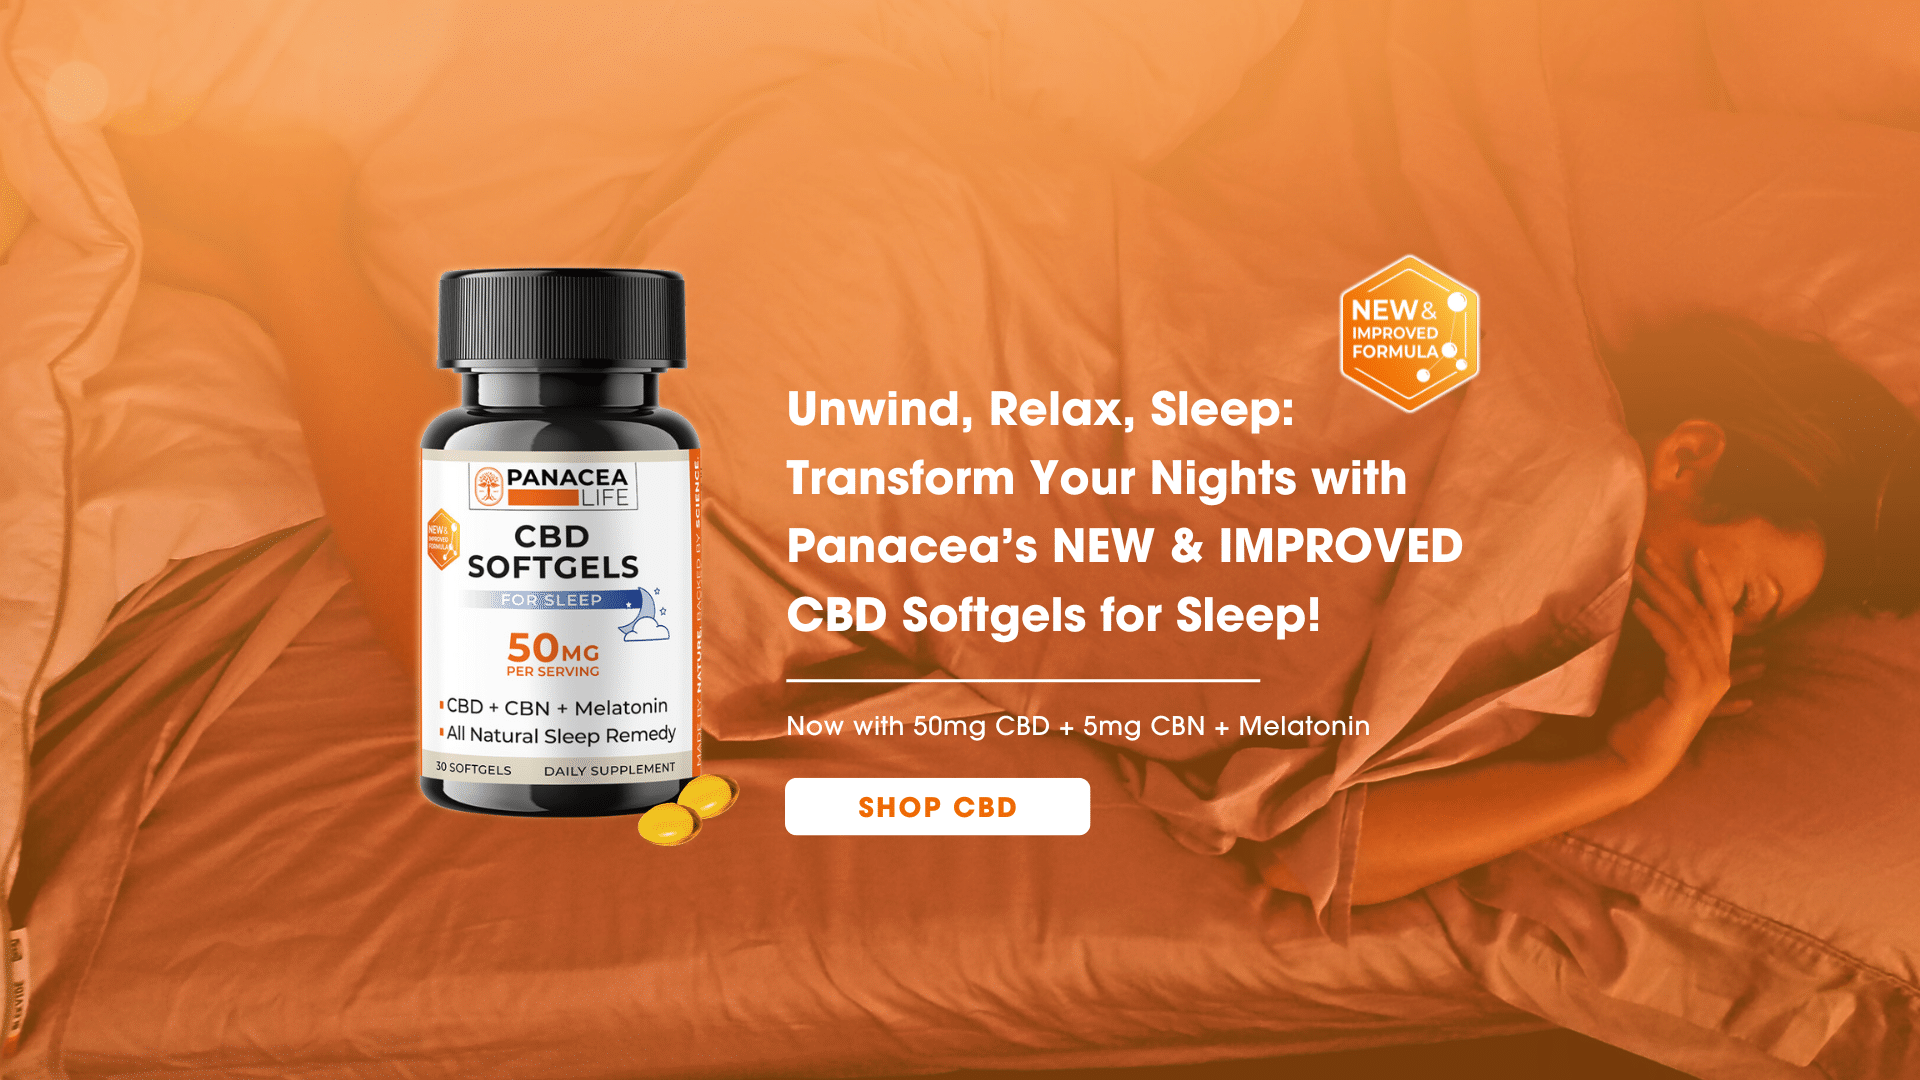 Unwind, Relax, Sleep: Transform Your Nights with Panacea’s NEW & IMPROVED CBD Softgels for Sleep!